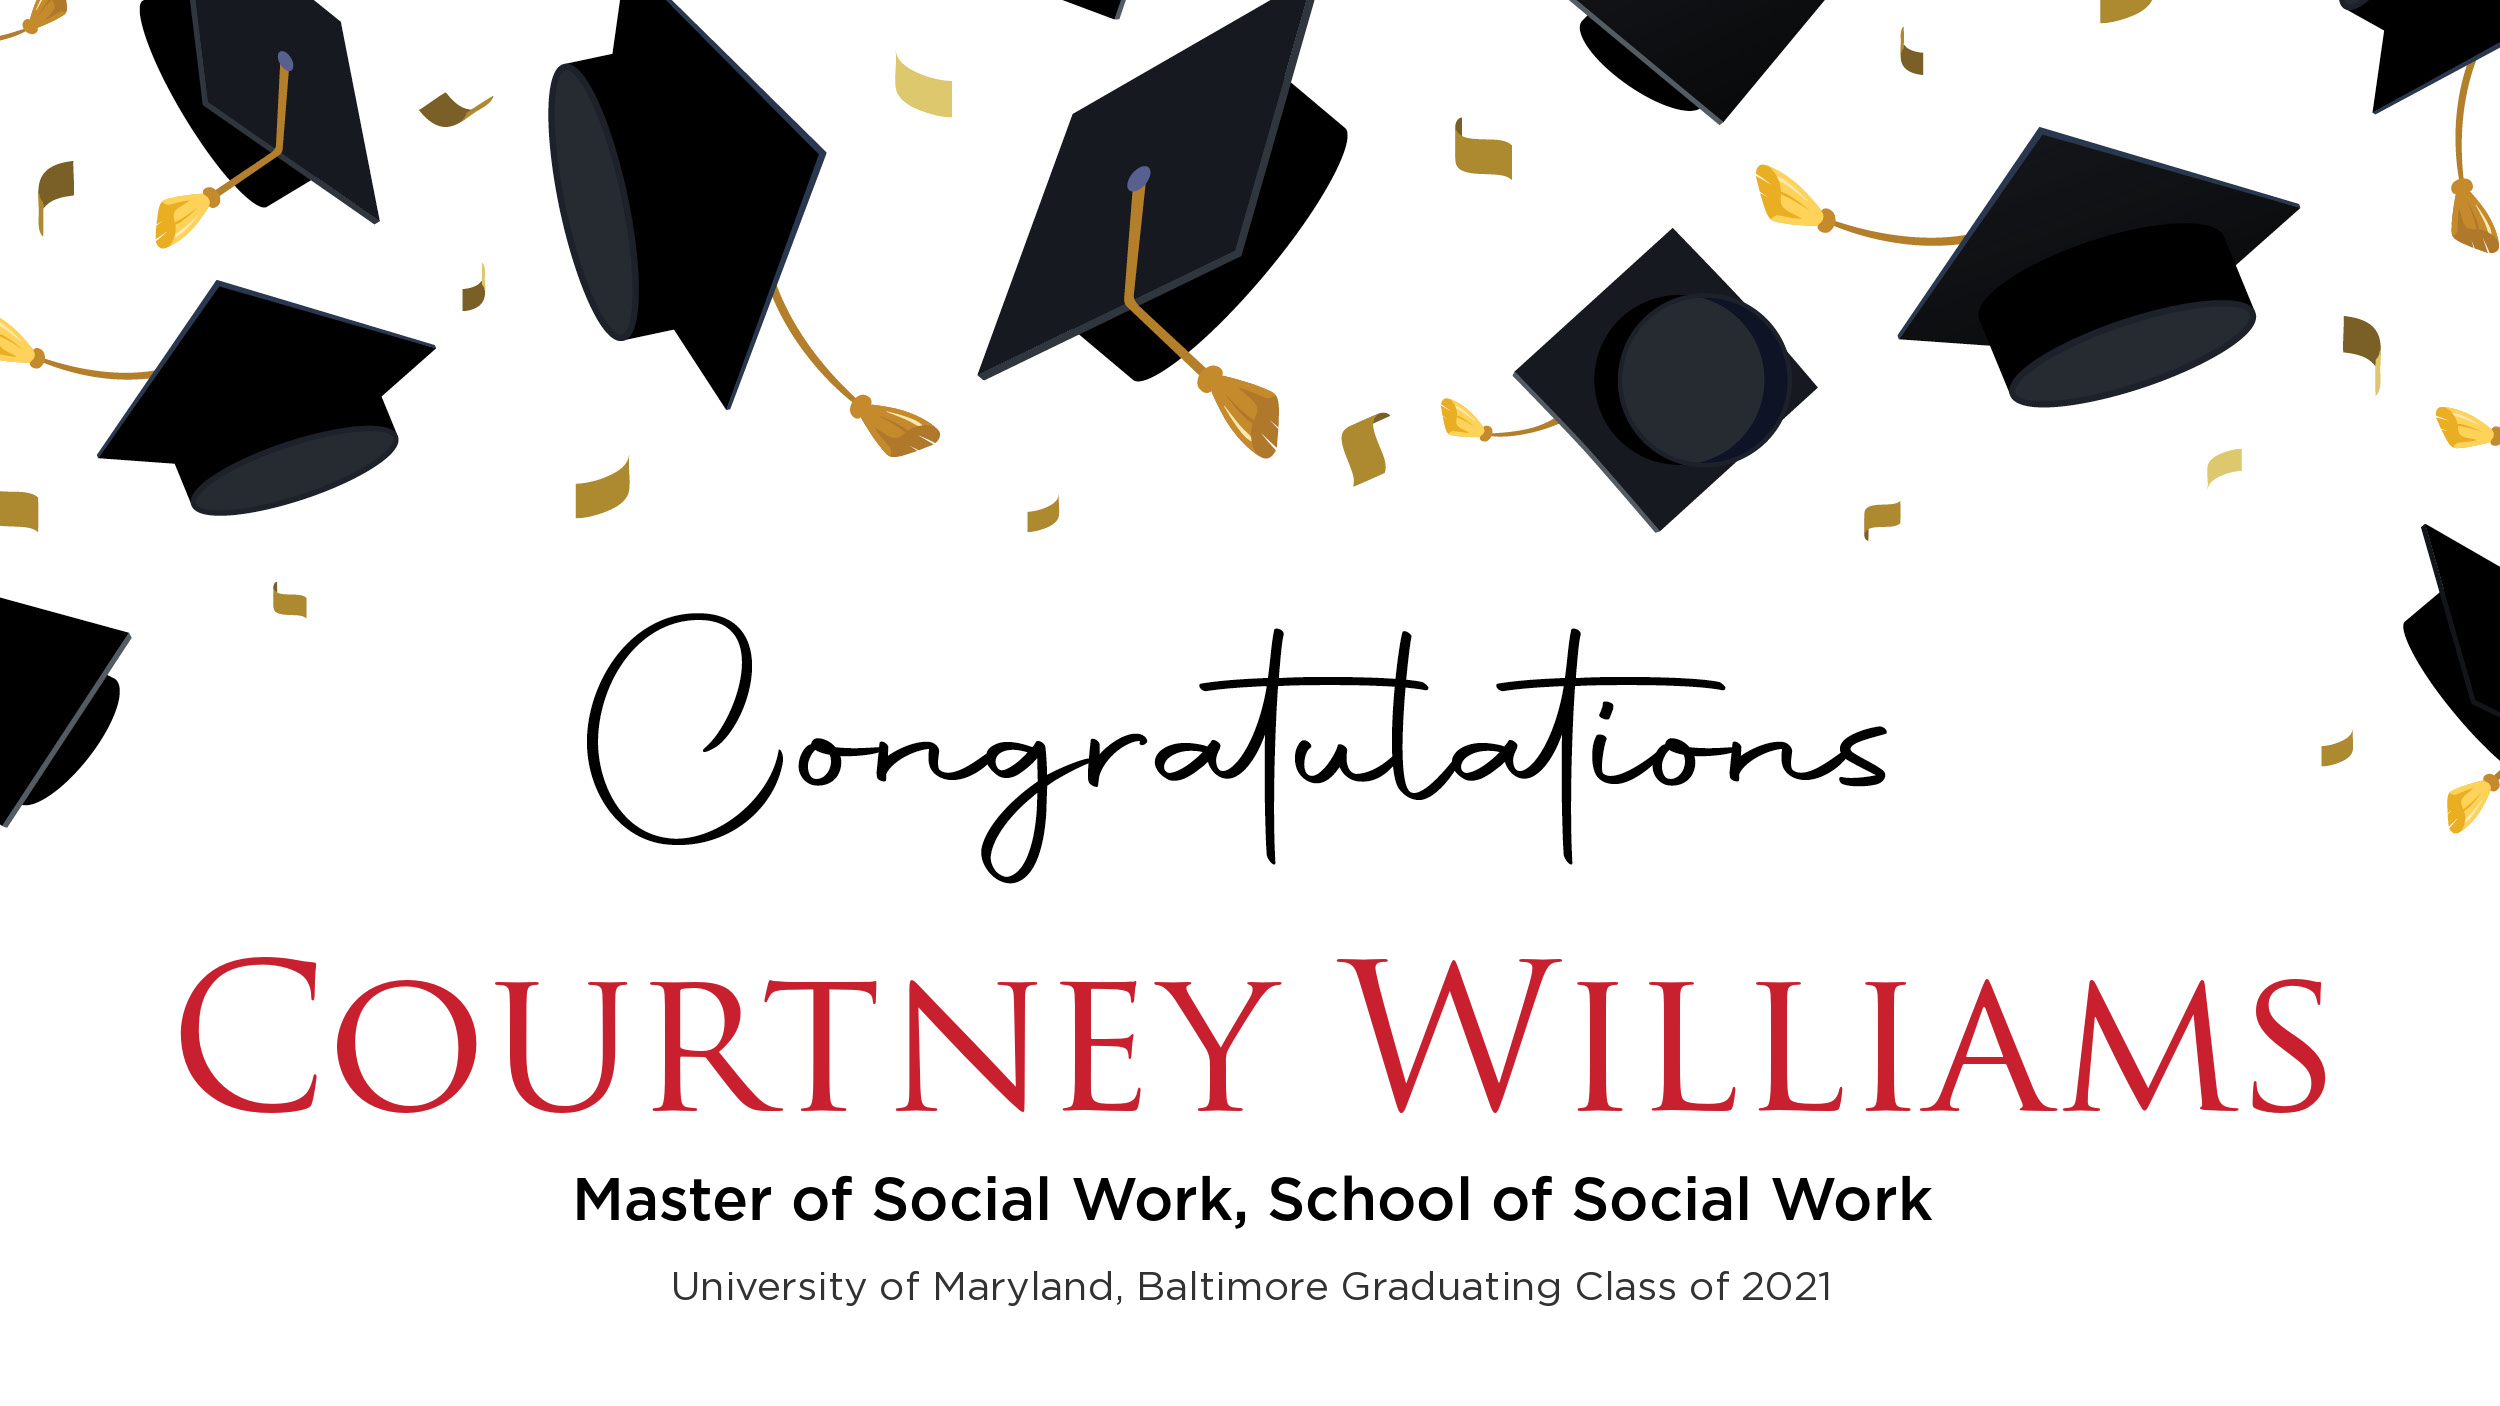 Congratulations Courtney Williams, Master of Social Work